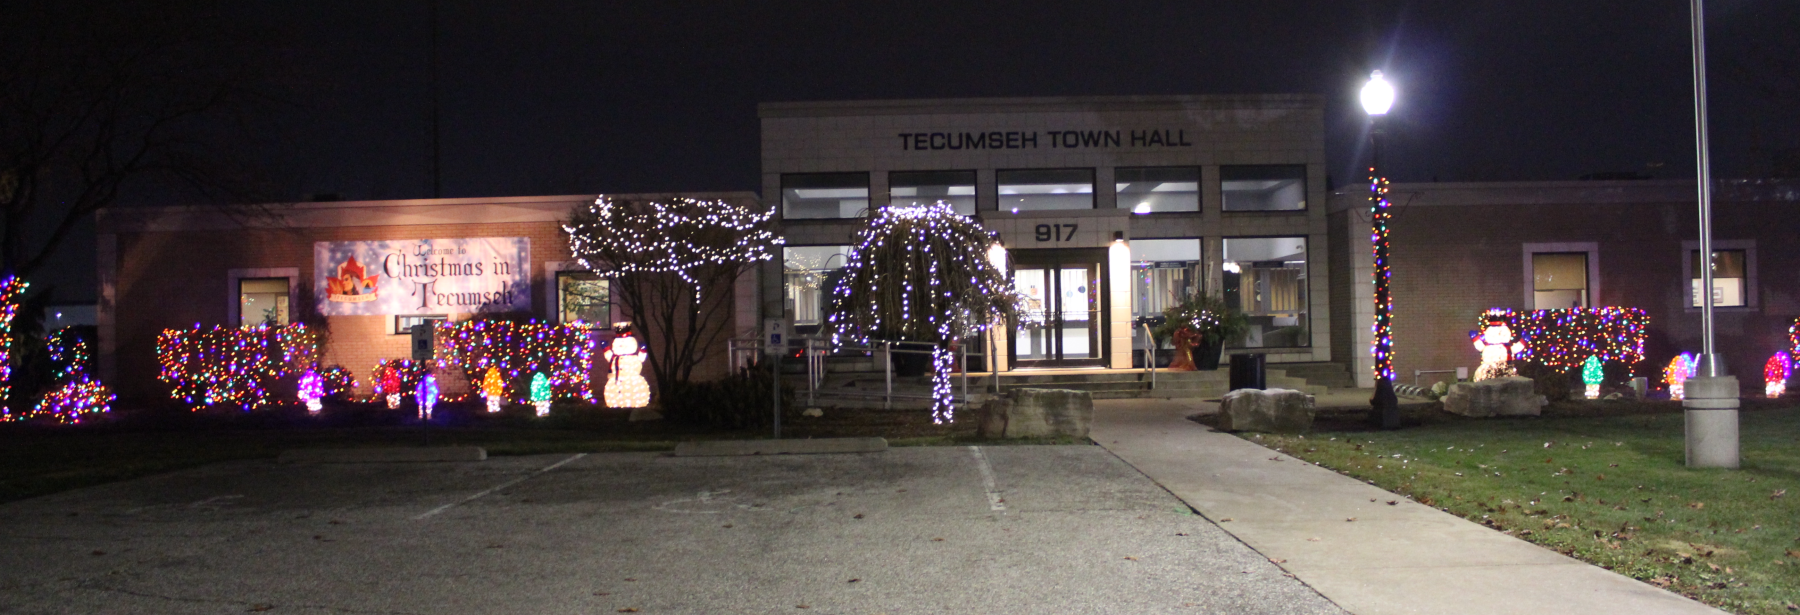 town hall decorated for christmas